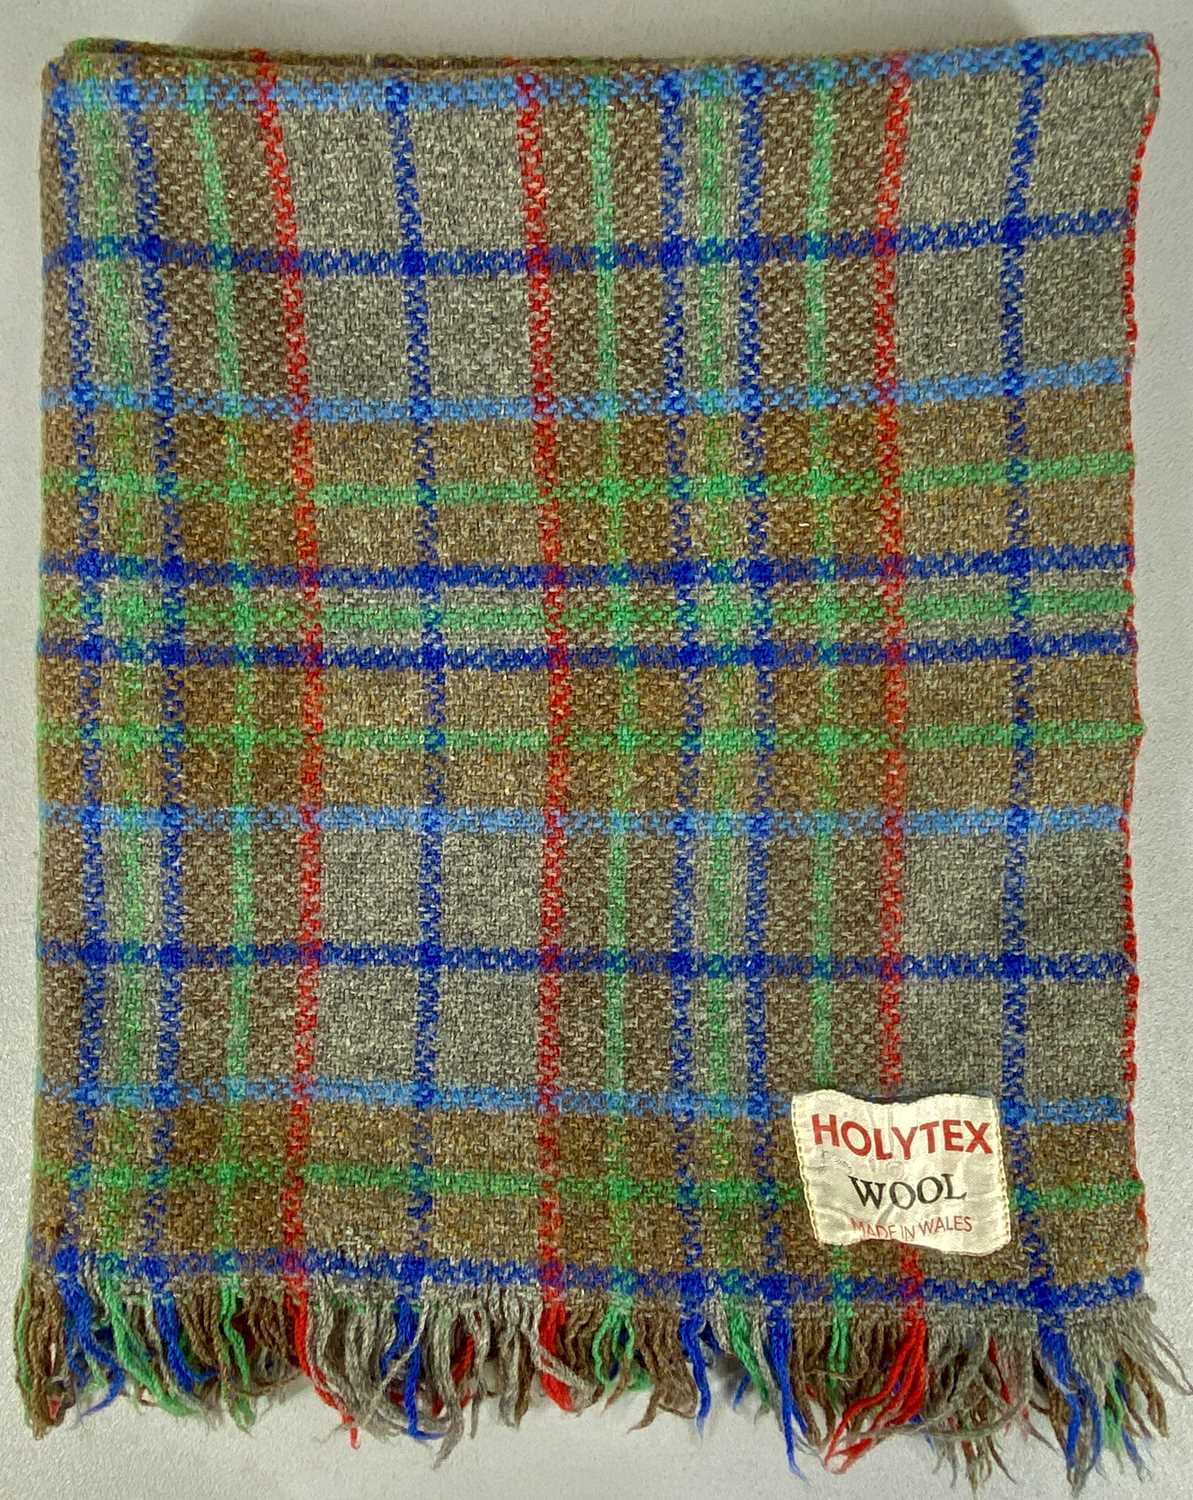 VINTAGE HOLYTEX PURE VIRGIN WOOL WELSH BLANKET, blue, purple, cream double sided, approx. 188 x - Image 4 of 5